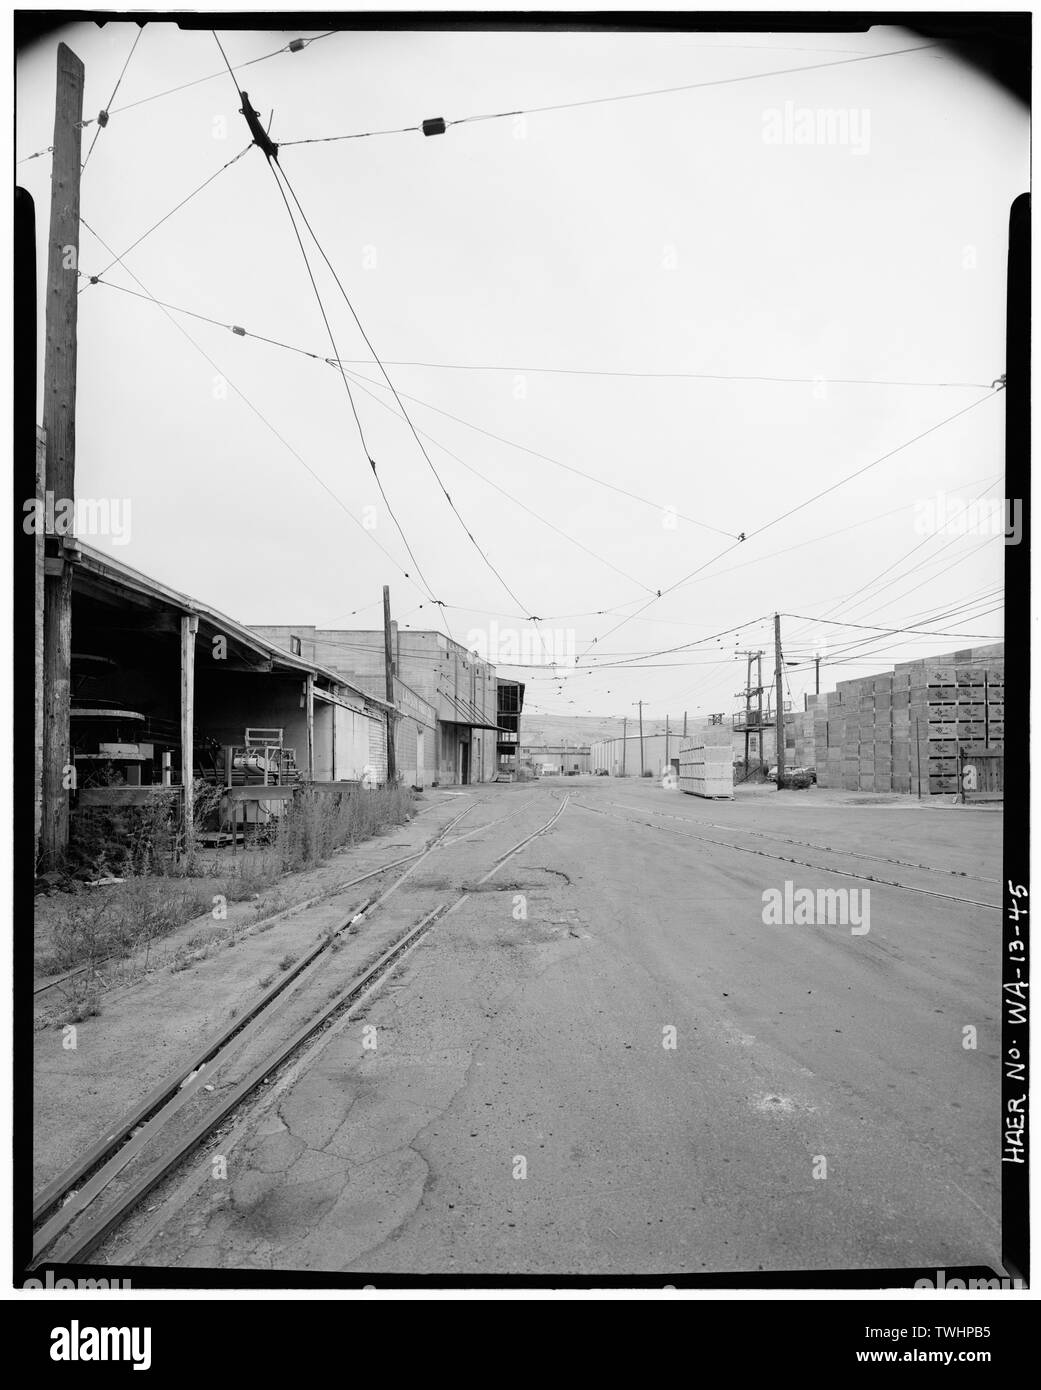 SELAH LINE, LOOKING NORTHEAST, SHOWING END OF LINE AT LARSON FRUIT COMPANY - Yakima Valley Transportation Company Interurban Railroad, Connecting towns of Yakima, Selah and Wiley City, Yakima, Yakima County, WA; Kenly, Edward M; Whitson, Edward; Sawyer, William P; Scudder, Henry B; Yakima Inter-Valley Traction Company; Splawn, A J; Rankin, George S; Niles Car Company; Yearby, Jean P, transmitter; Johnsen, Kenneth G, historian; Schmidt, Jigger, photographer Stock Photo